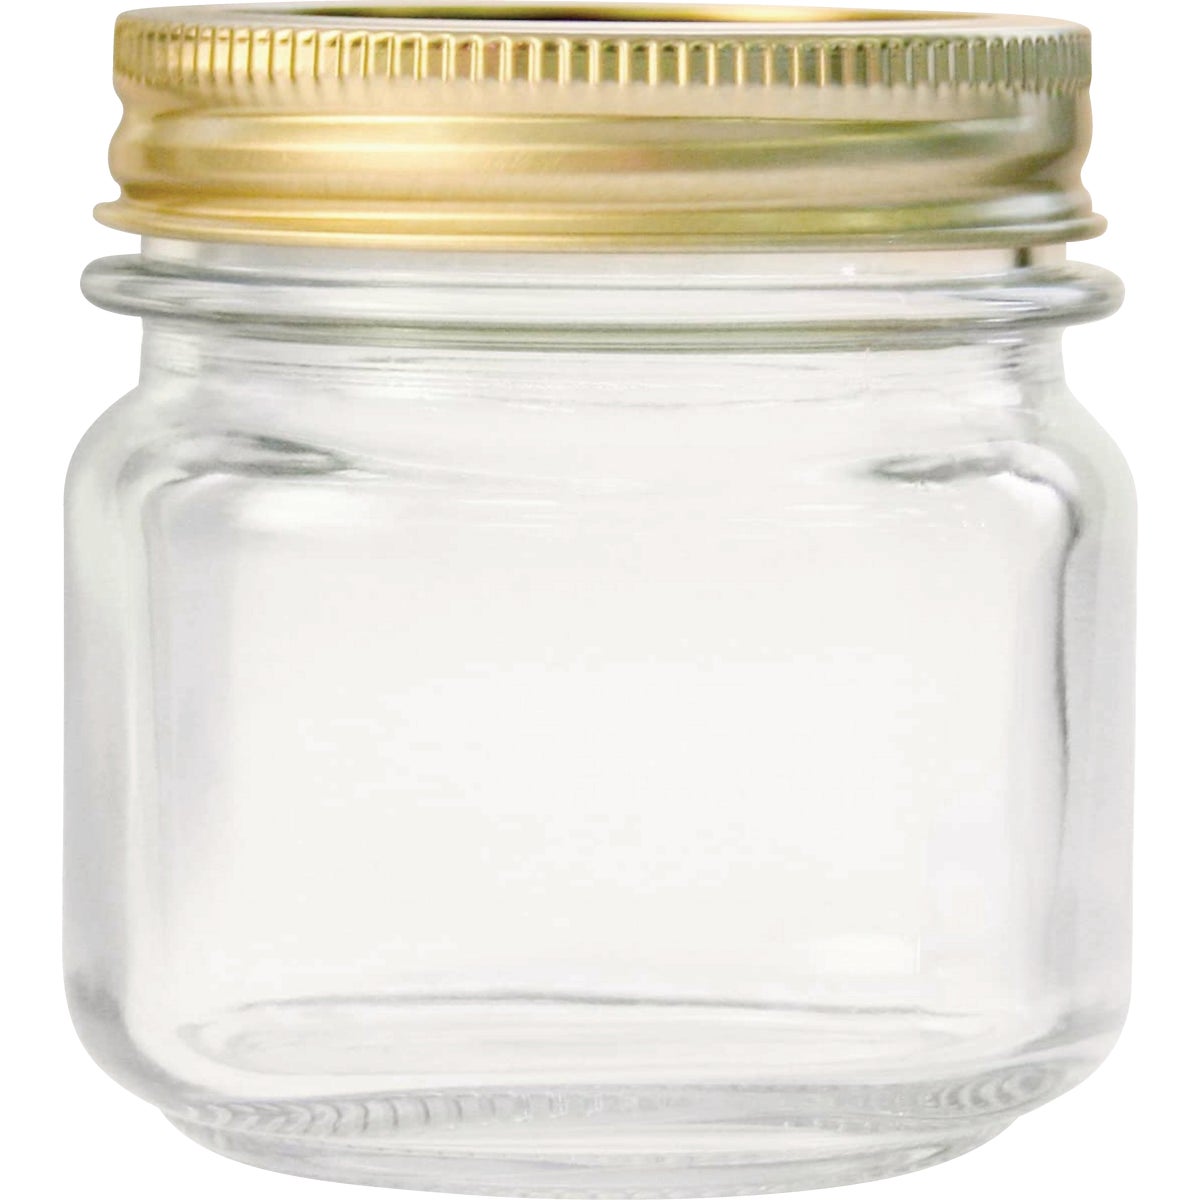 Item 602241, Anchor Hocking Smooth-Sided Glass Canning Jar 12-Pack offers a practical 